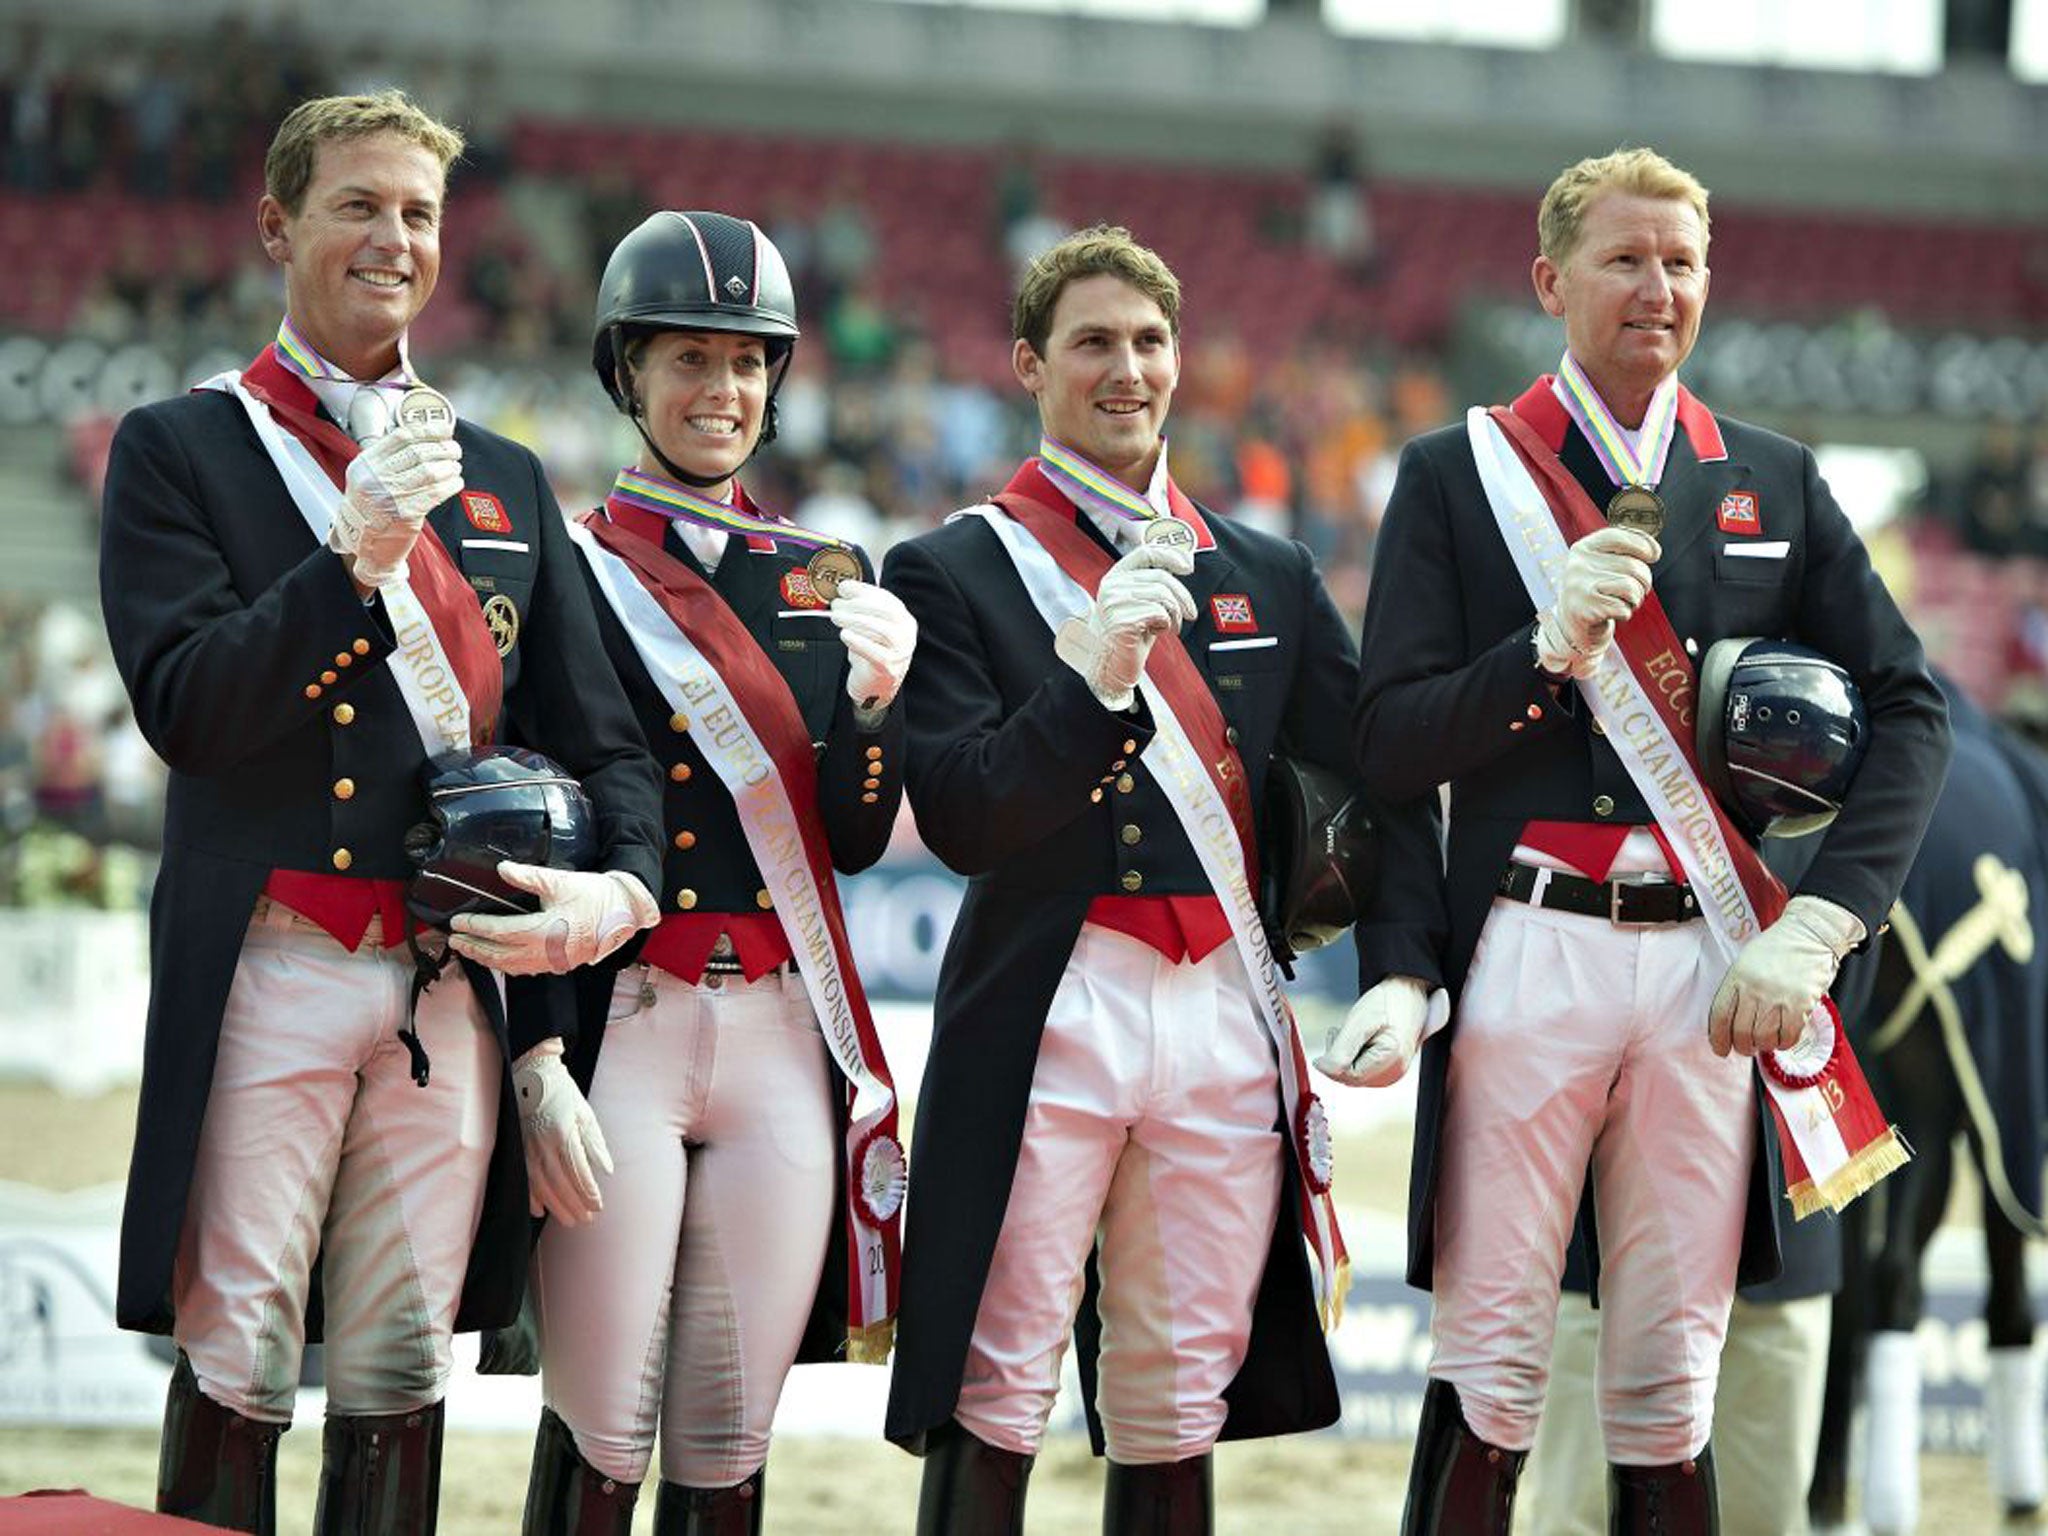 Dujardin, second from left, broke her own world best of 84.447 per cent